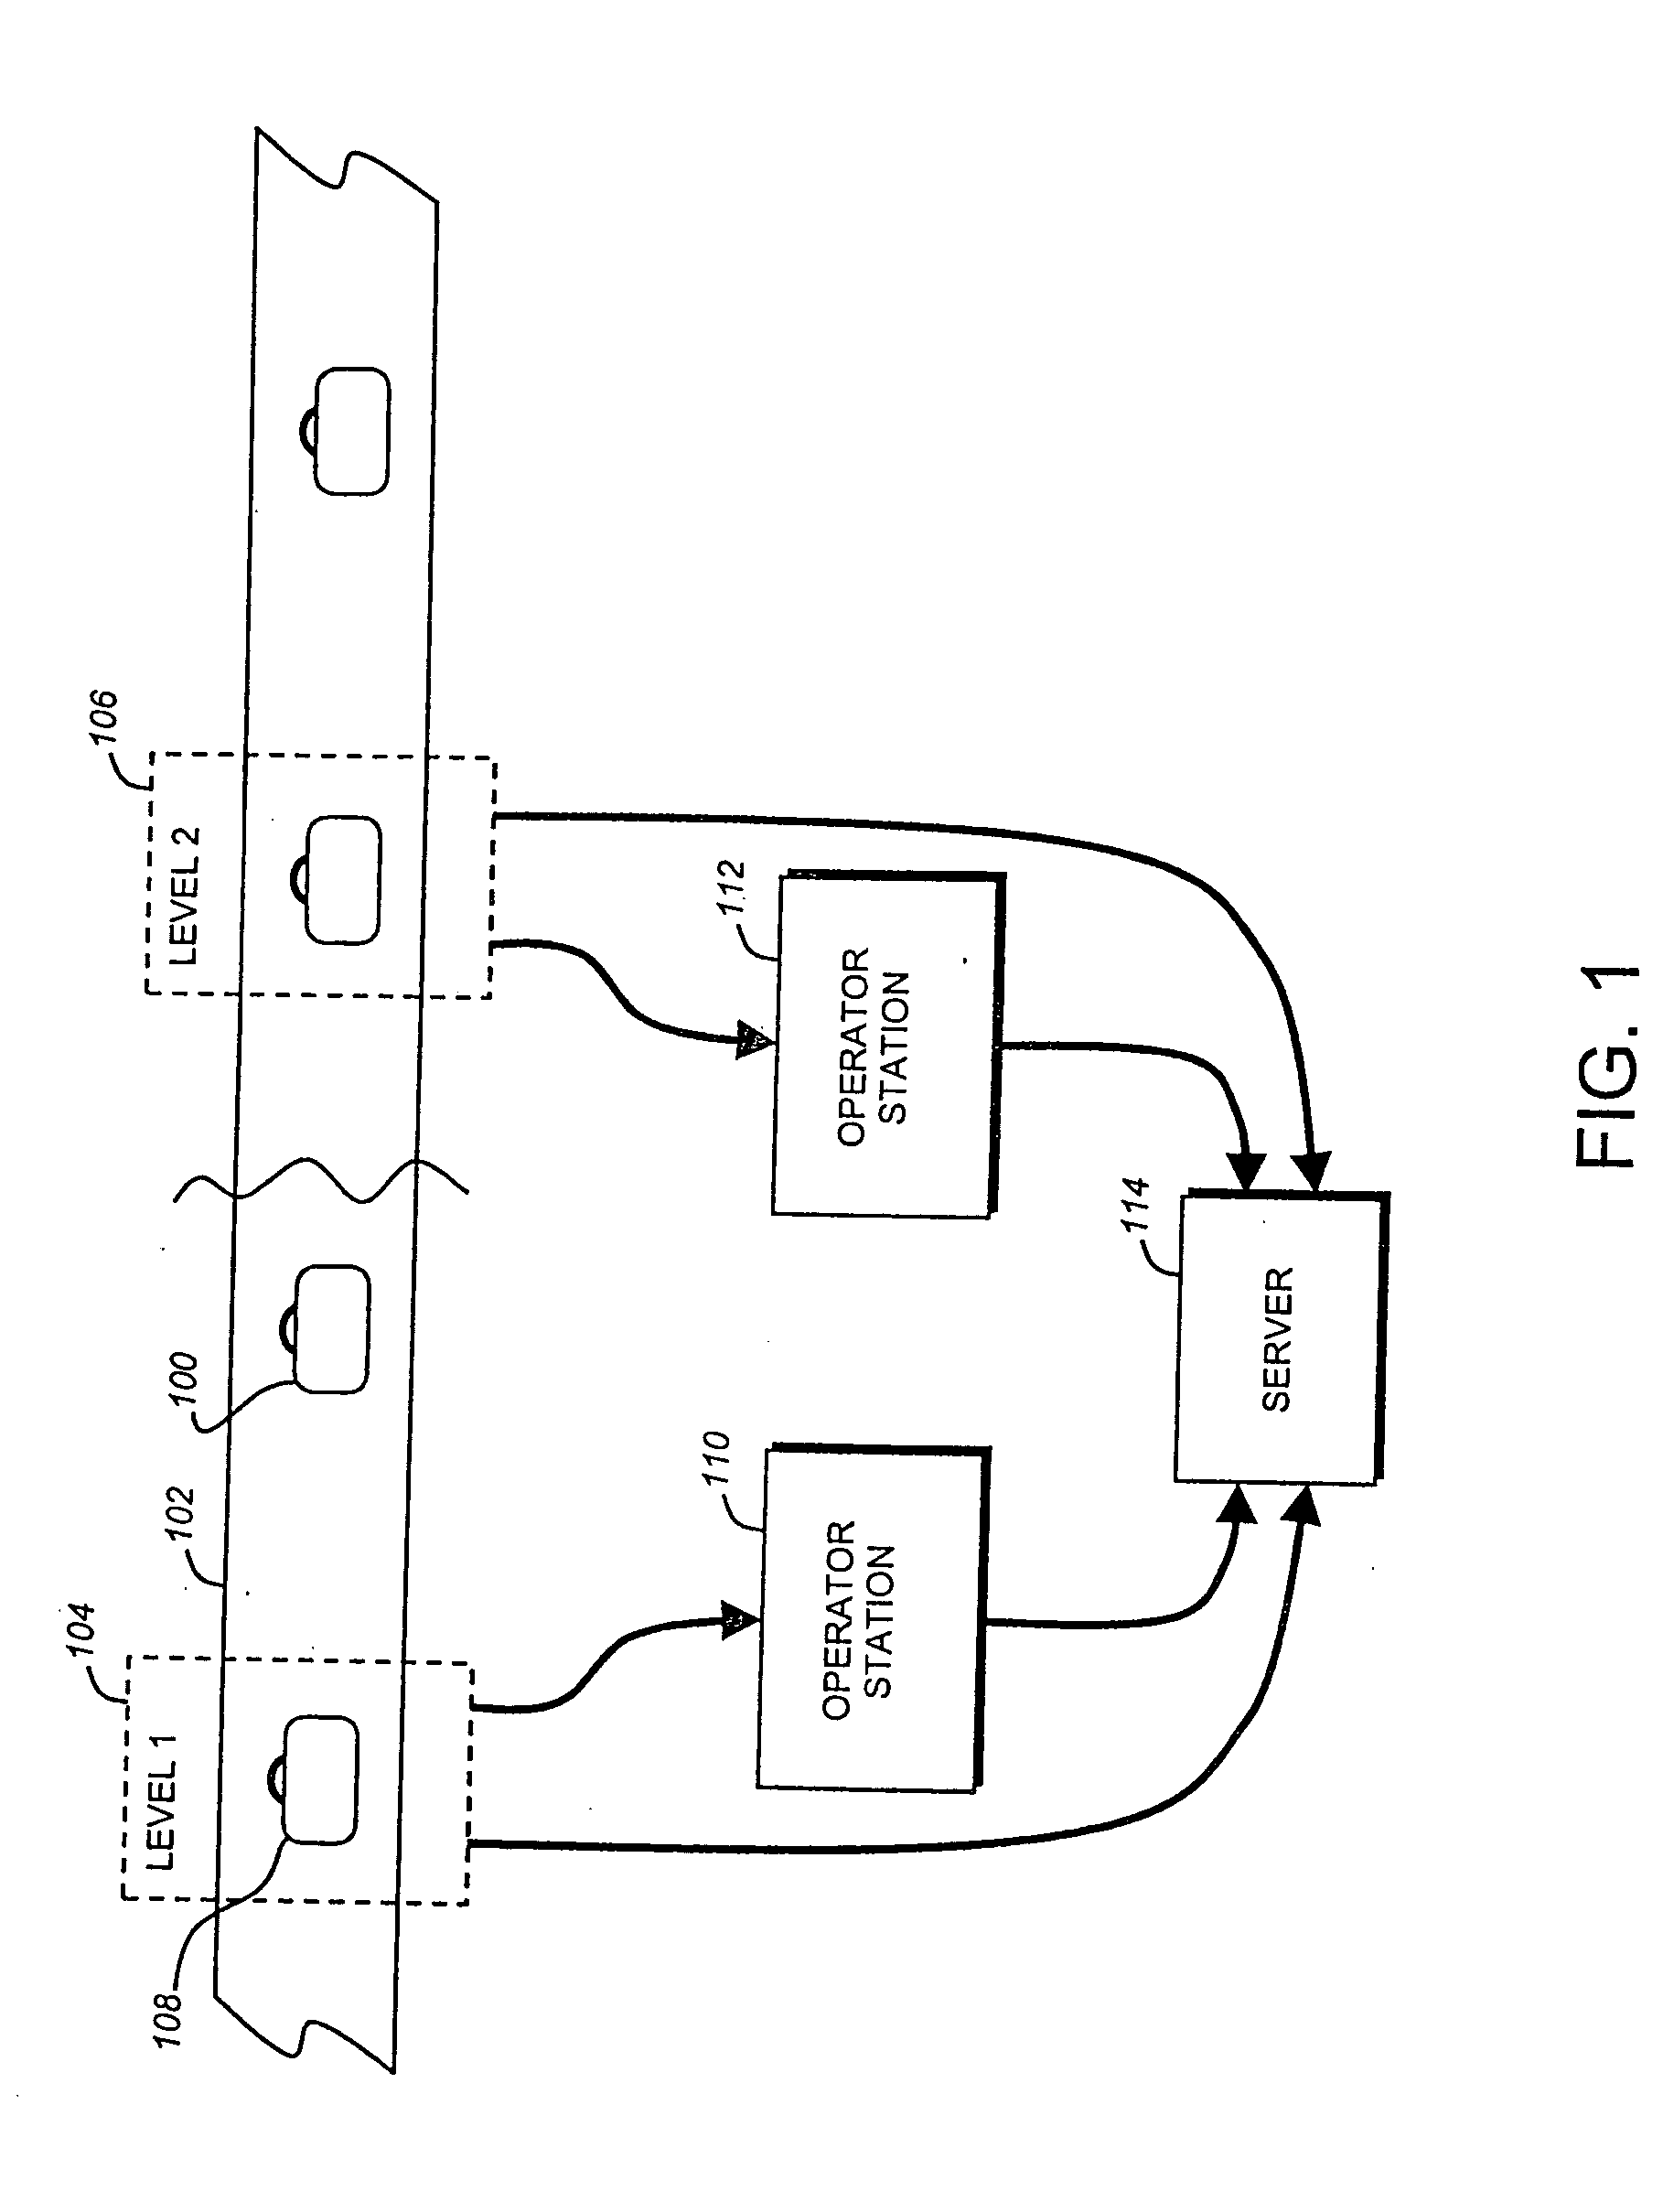 Remote baggage screening system, software and method